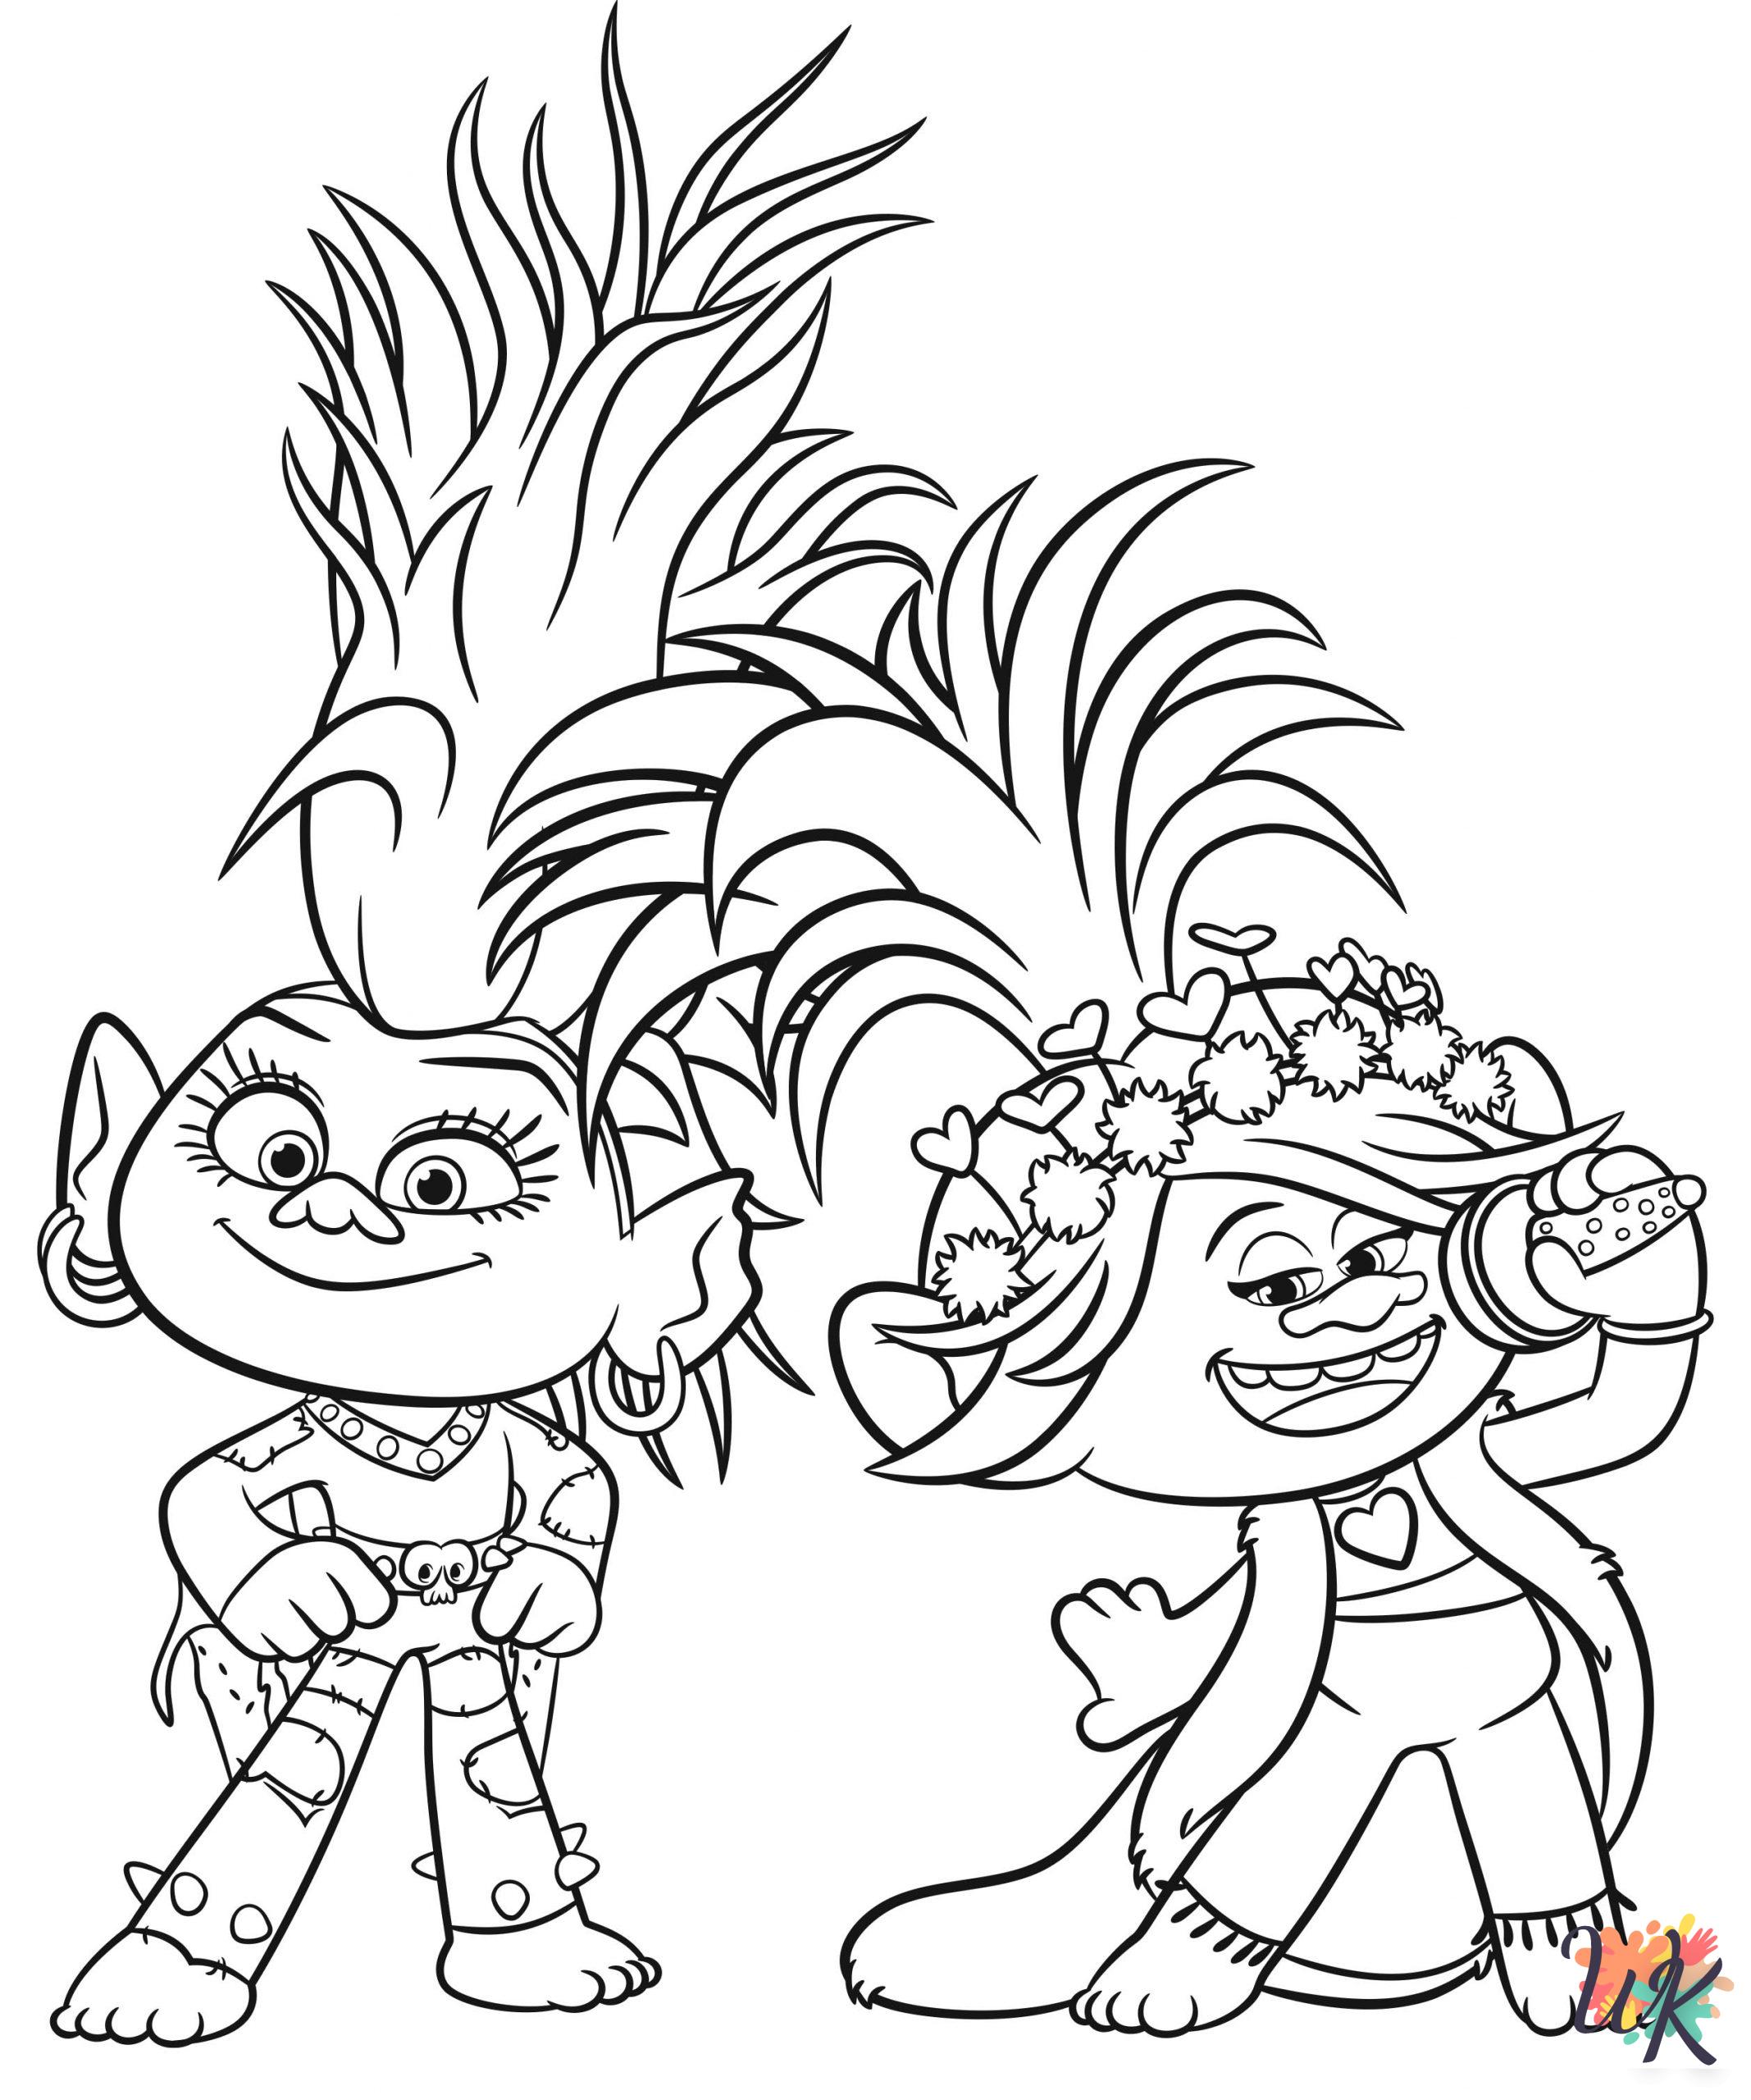 printable Trolls coloring pages for adults